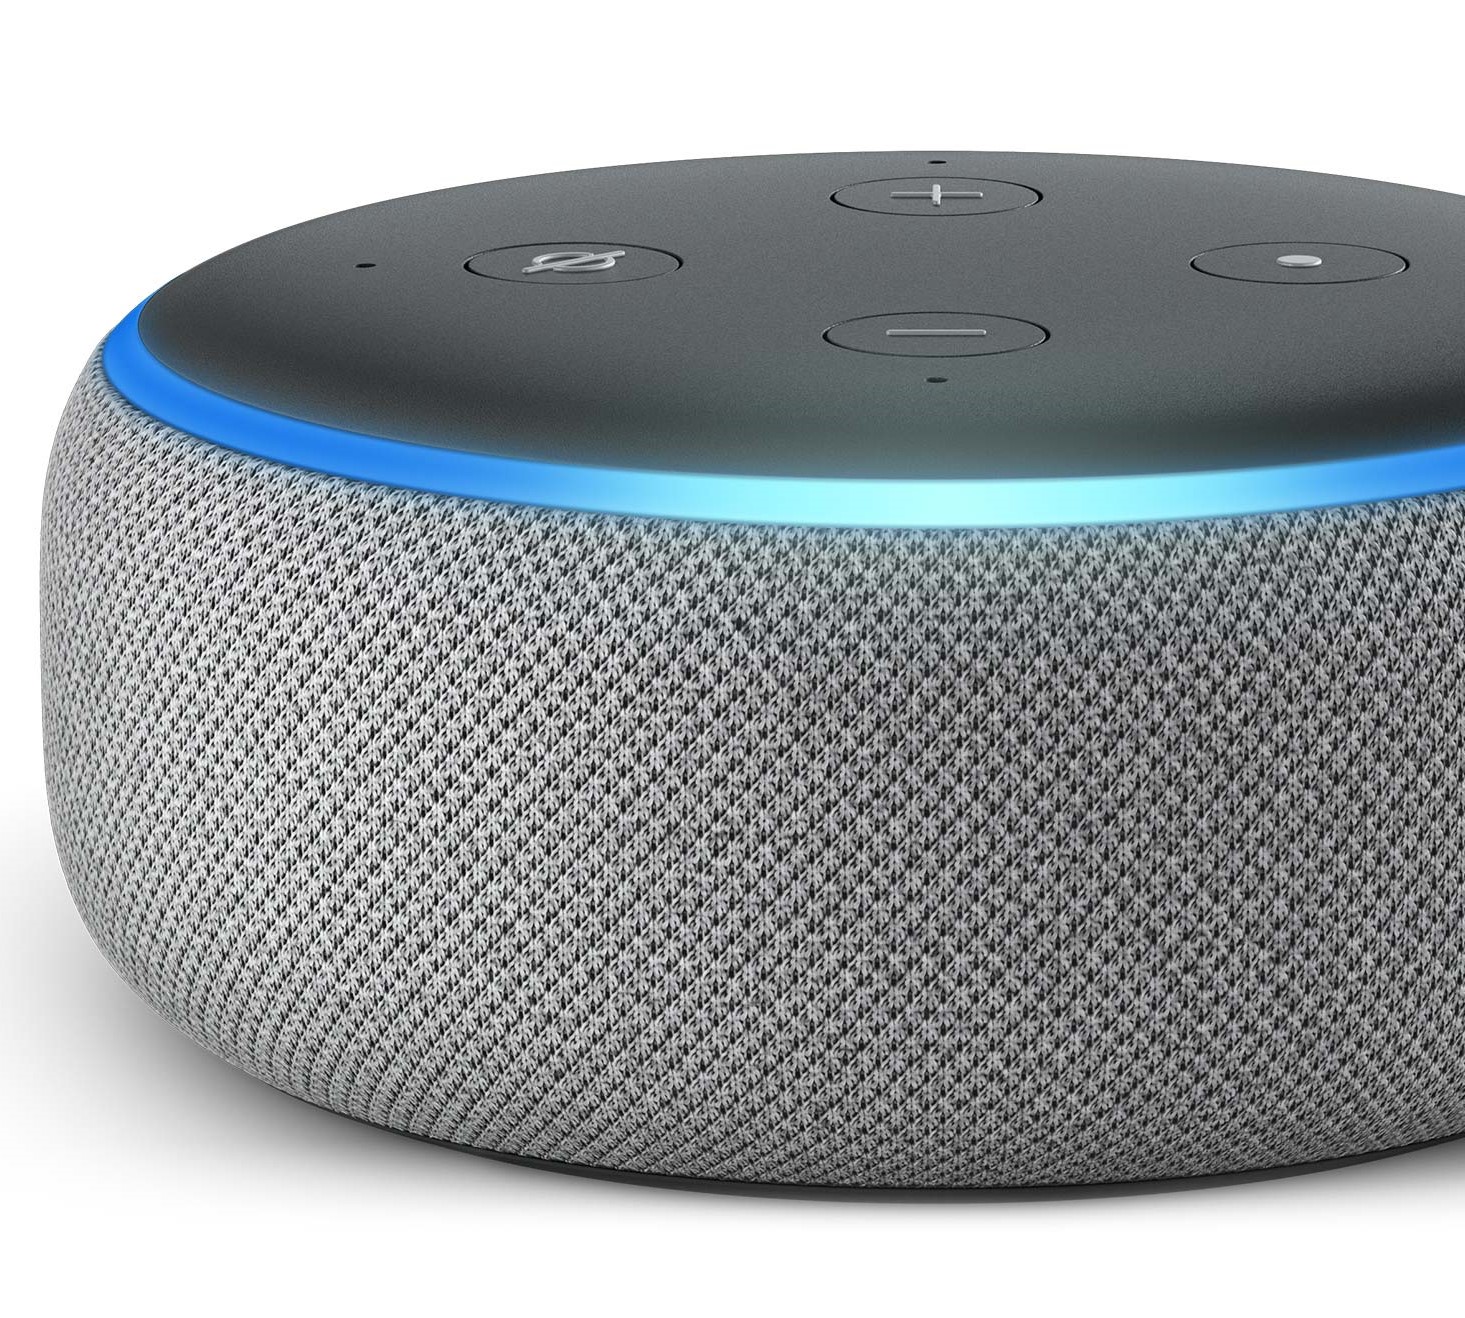 Here's how to set up your  Echo Dot 3 - Reviewed